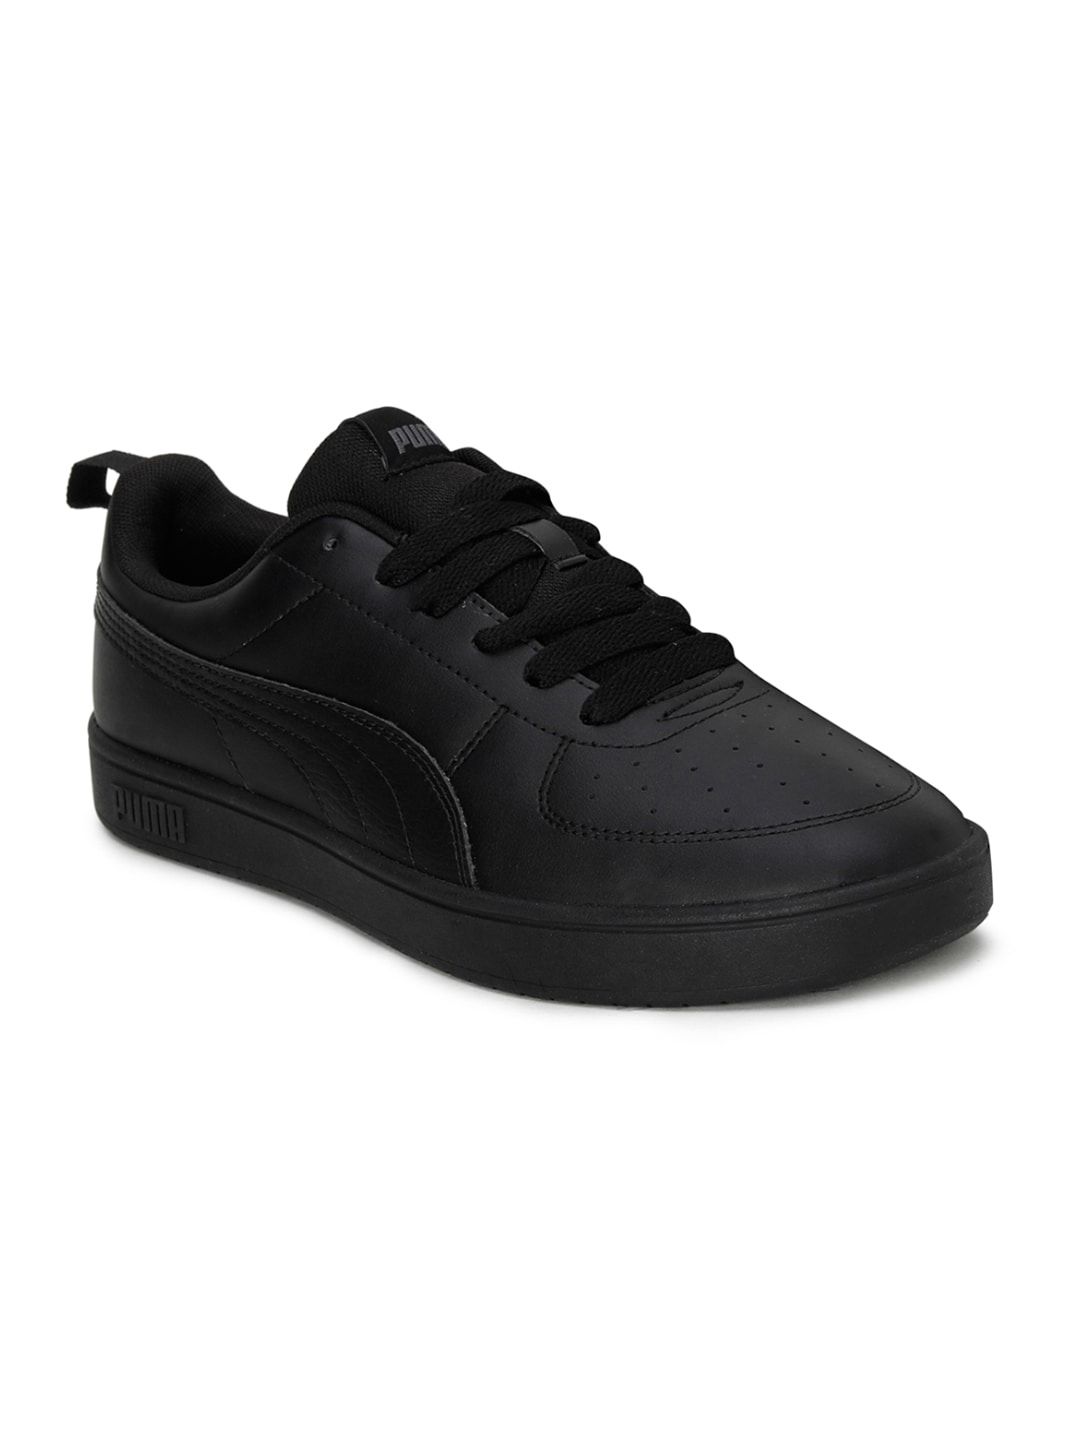 Puma Black Solid Casual Sneakers Price in India